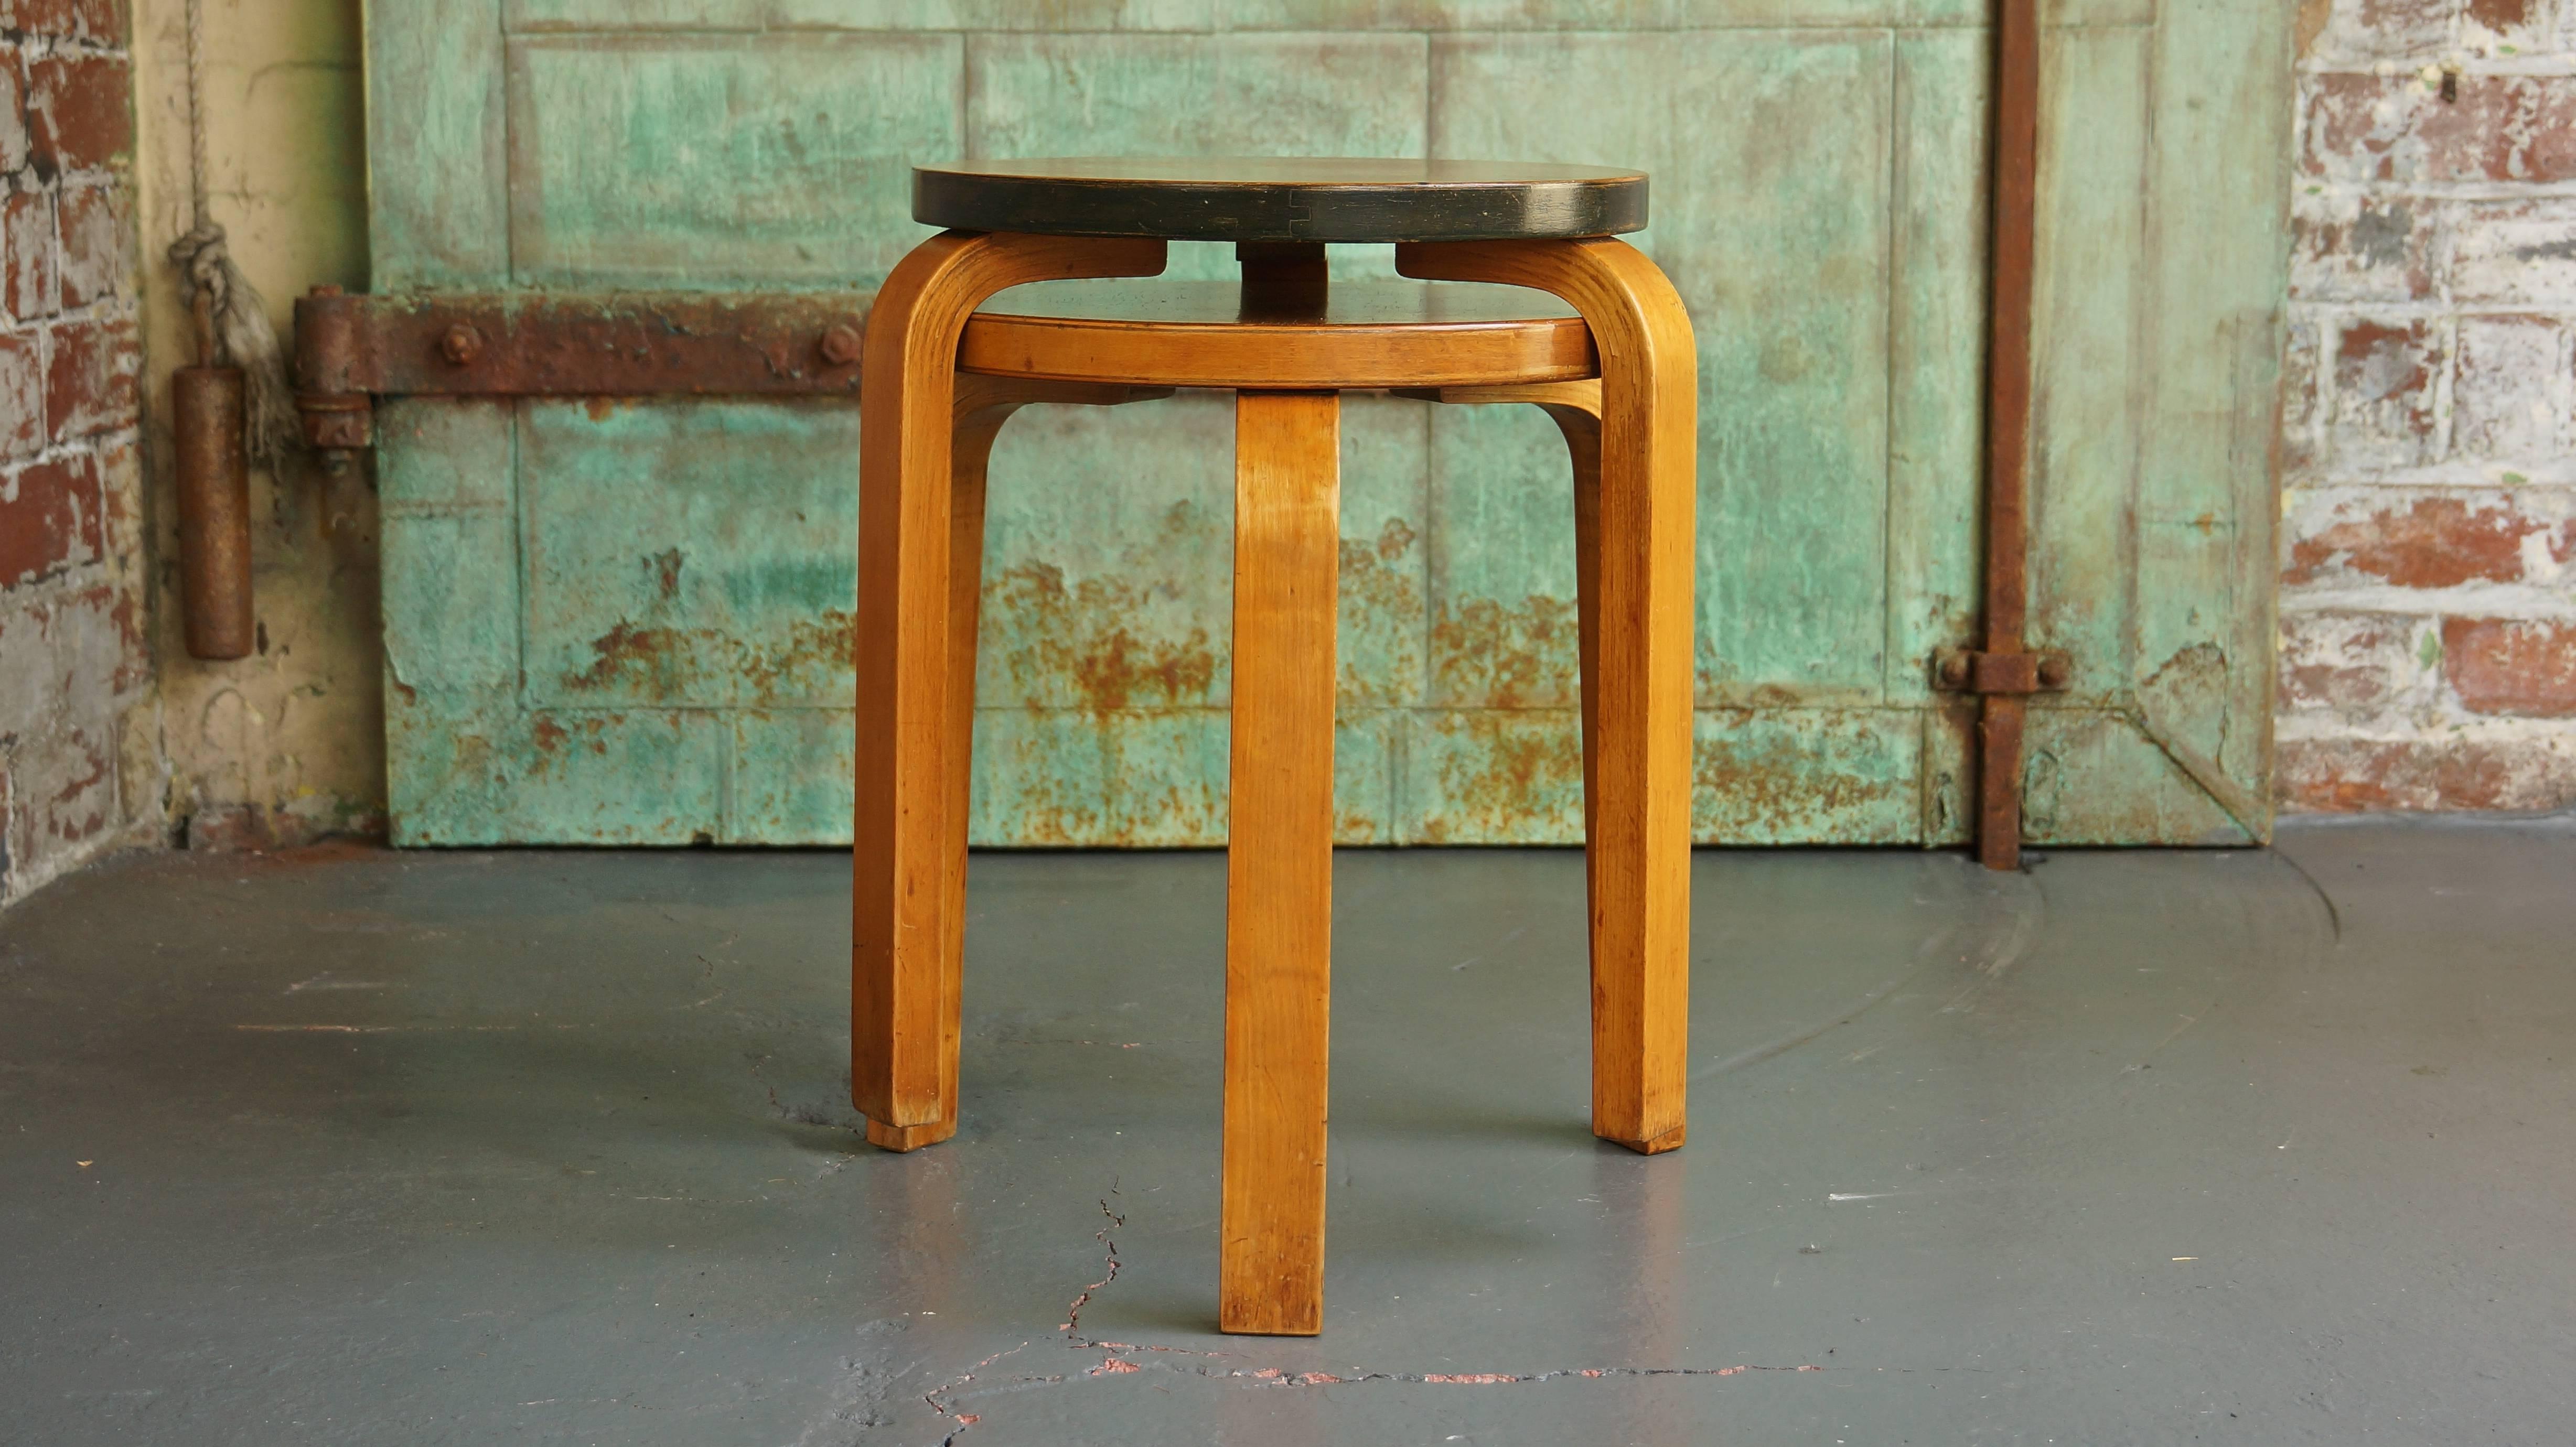 Pair of Early Alvar Aalto nesting stools by Finmar.

Good clean vintage condition with a desirable patina.

Alvar Aalto.
Manufactured by Finmar, Finland.
Model 60 stool, 1933.
Set of two.
Birch and birch plywood.
Original finmar plastic